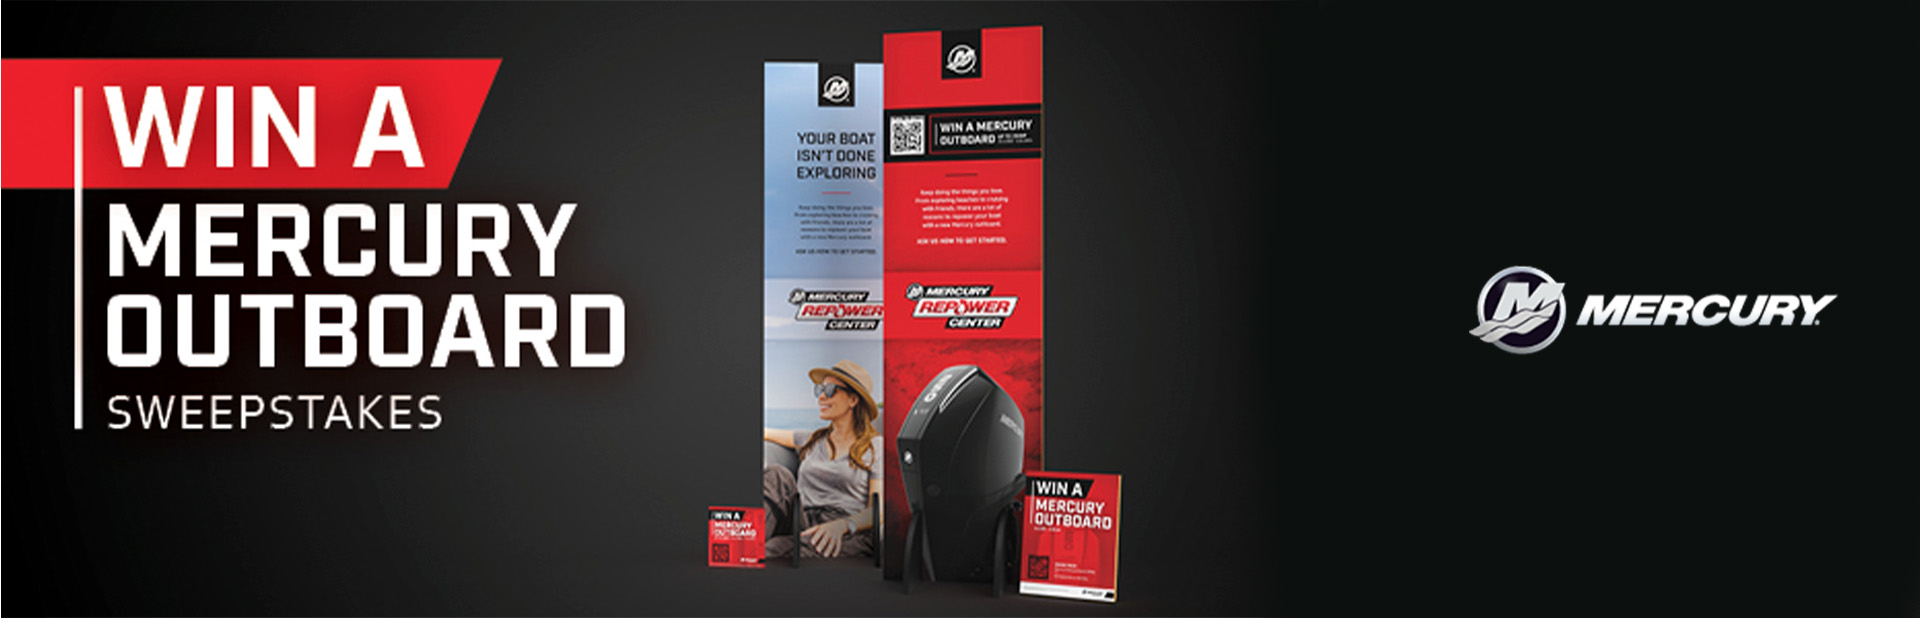 Win a Mercury Outboard Sweepstakes